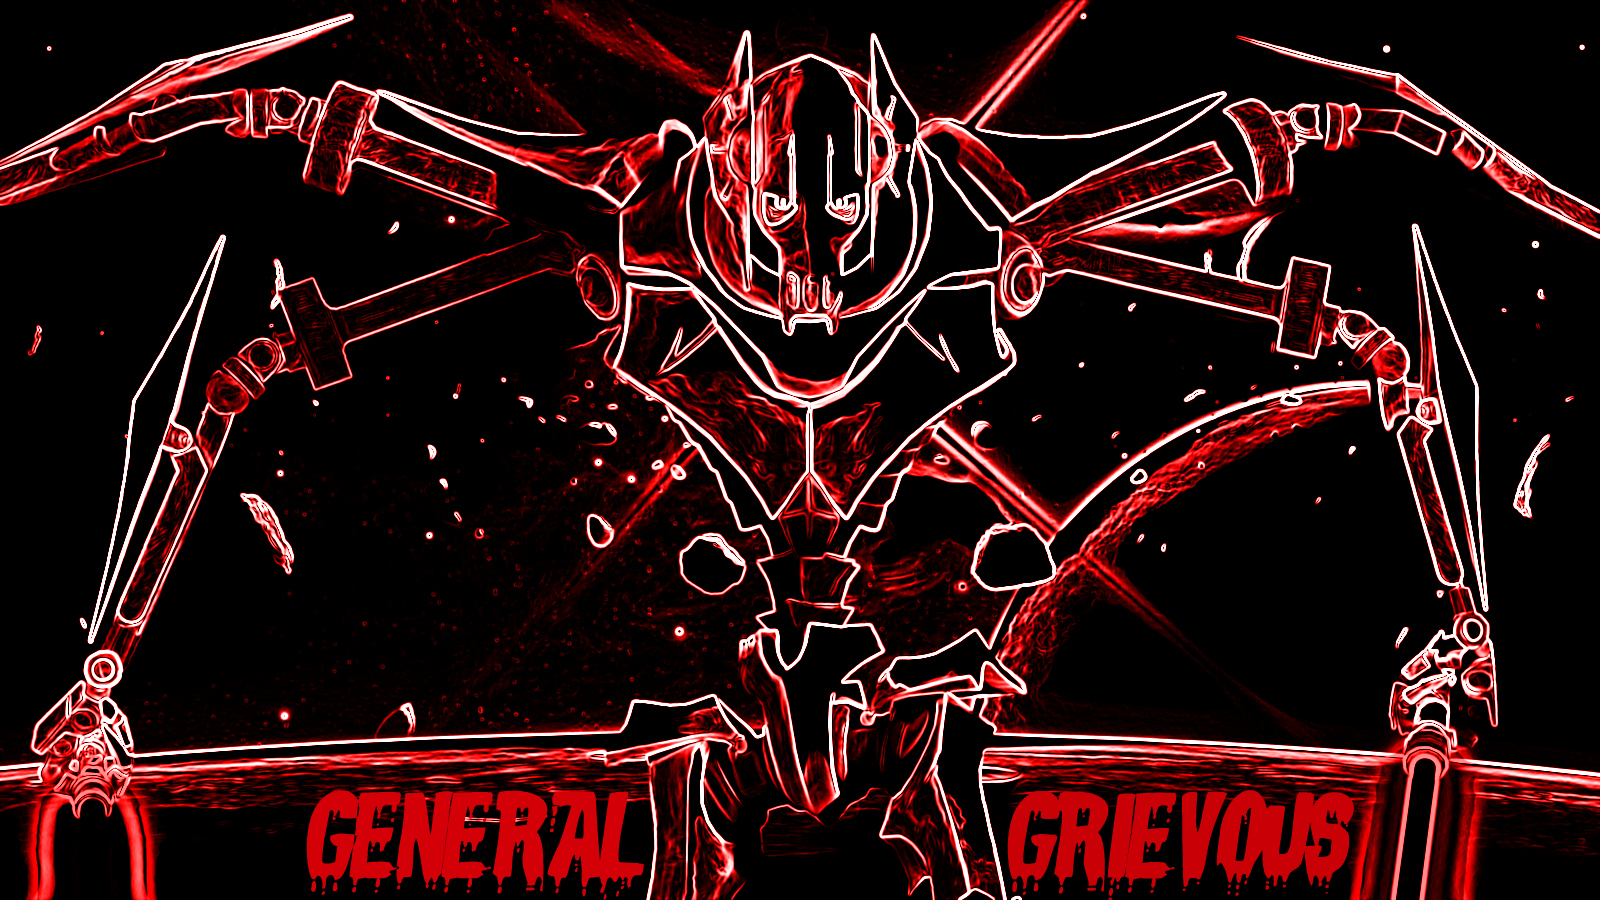 Click On The Images To Load The High Res Version - Star Wars Wallpaper Generał Grievous , HD Wallpaper & Backgrounds